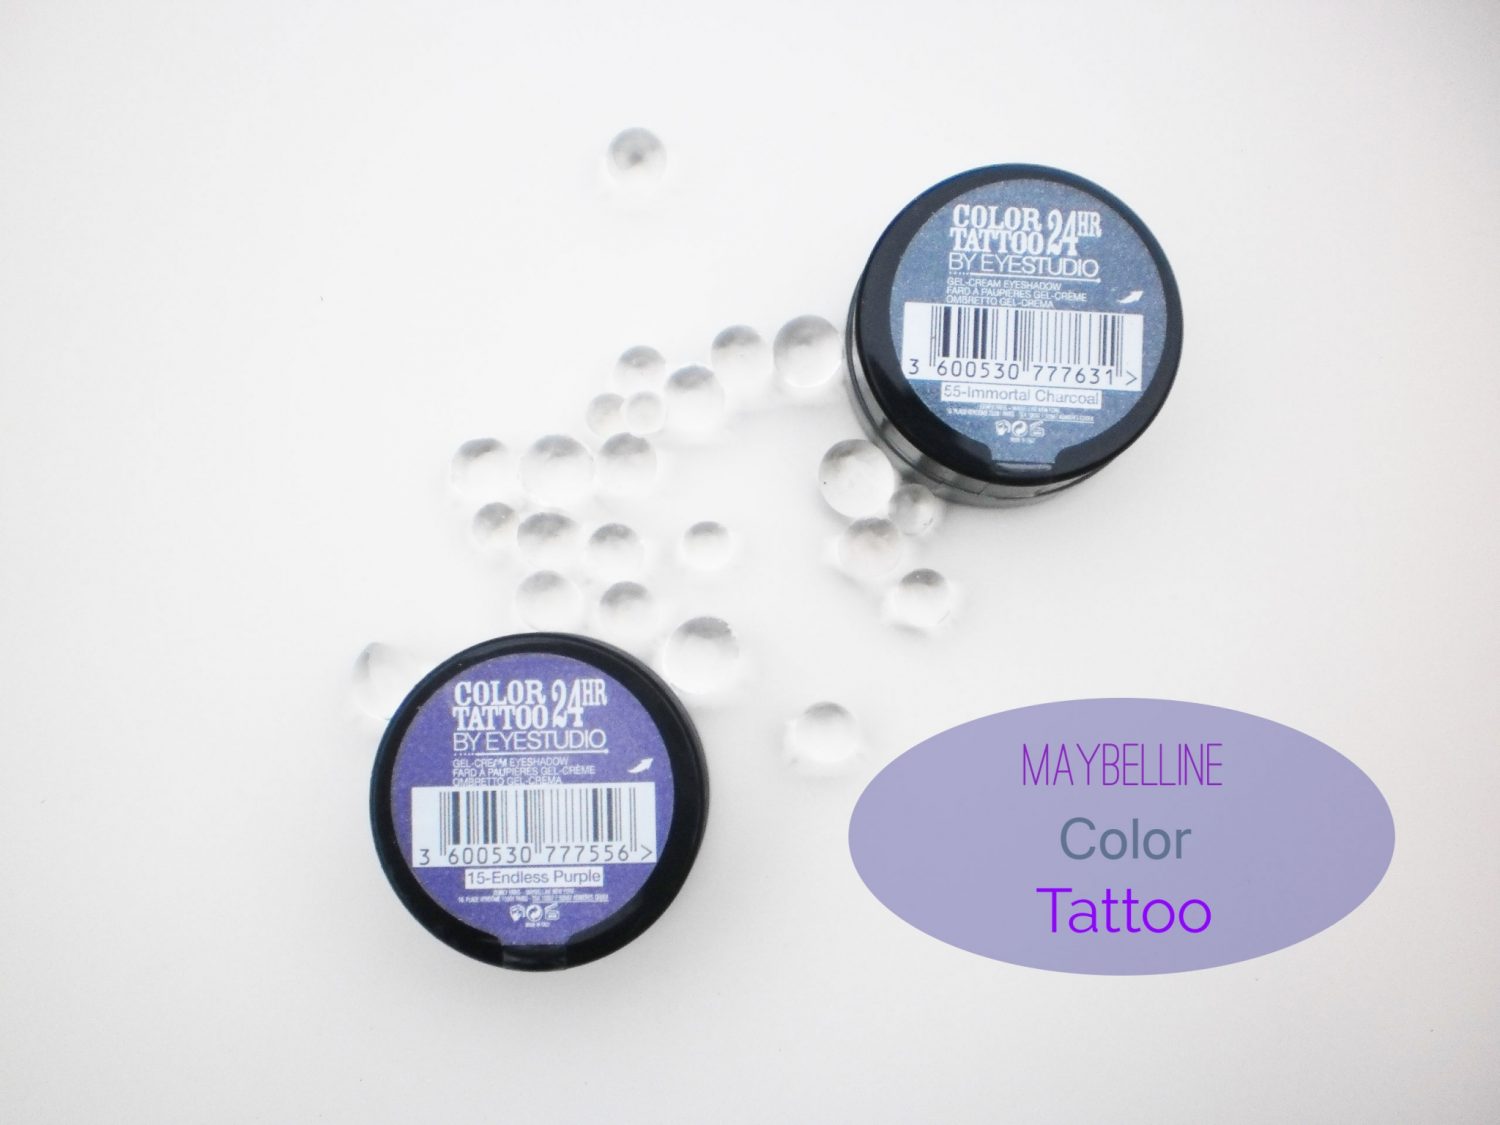 Review: Maybelline Color Tatoo